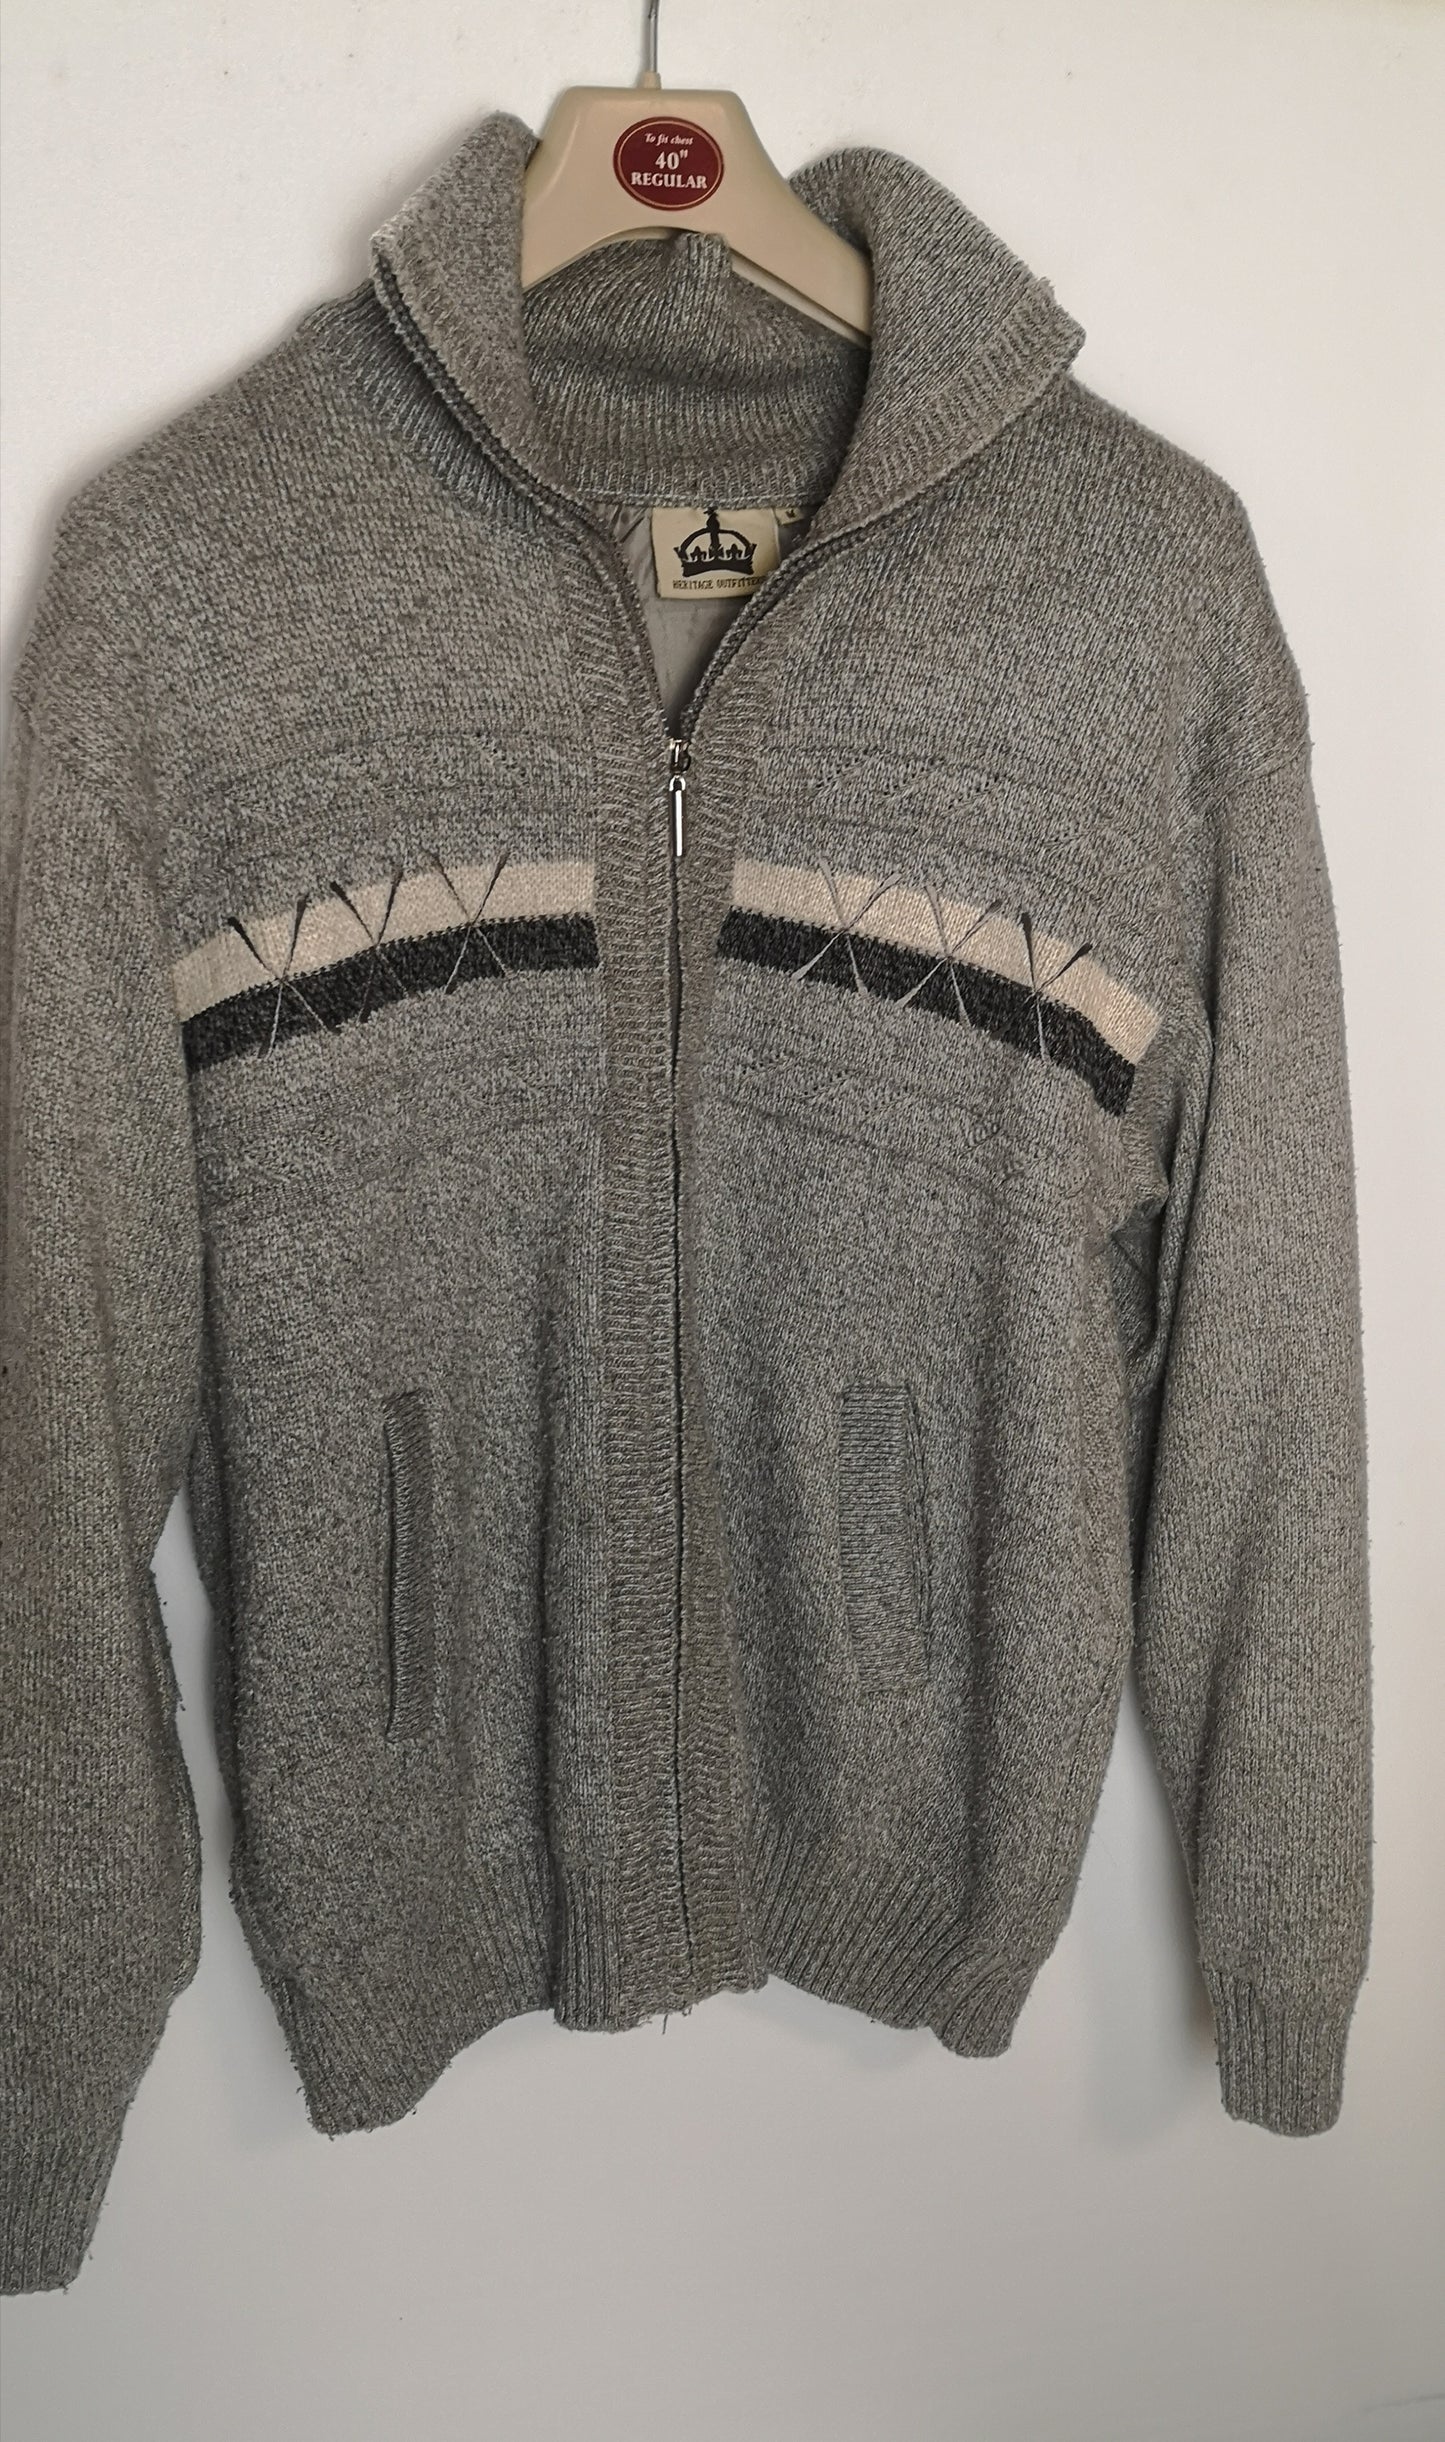 Heritage Outfitters Light Grey Full Zip Cardigan Jacket Size M